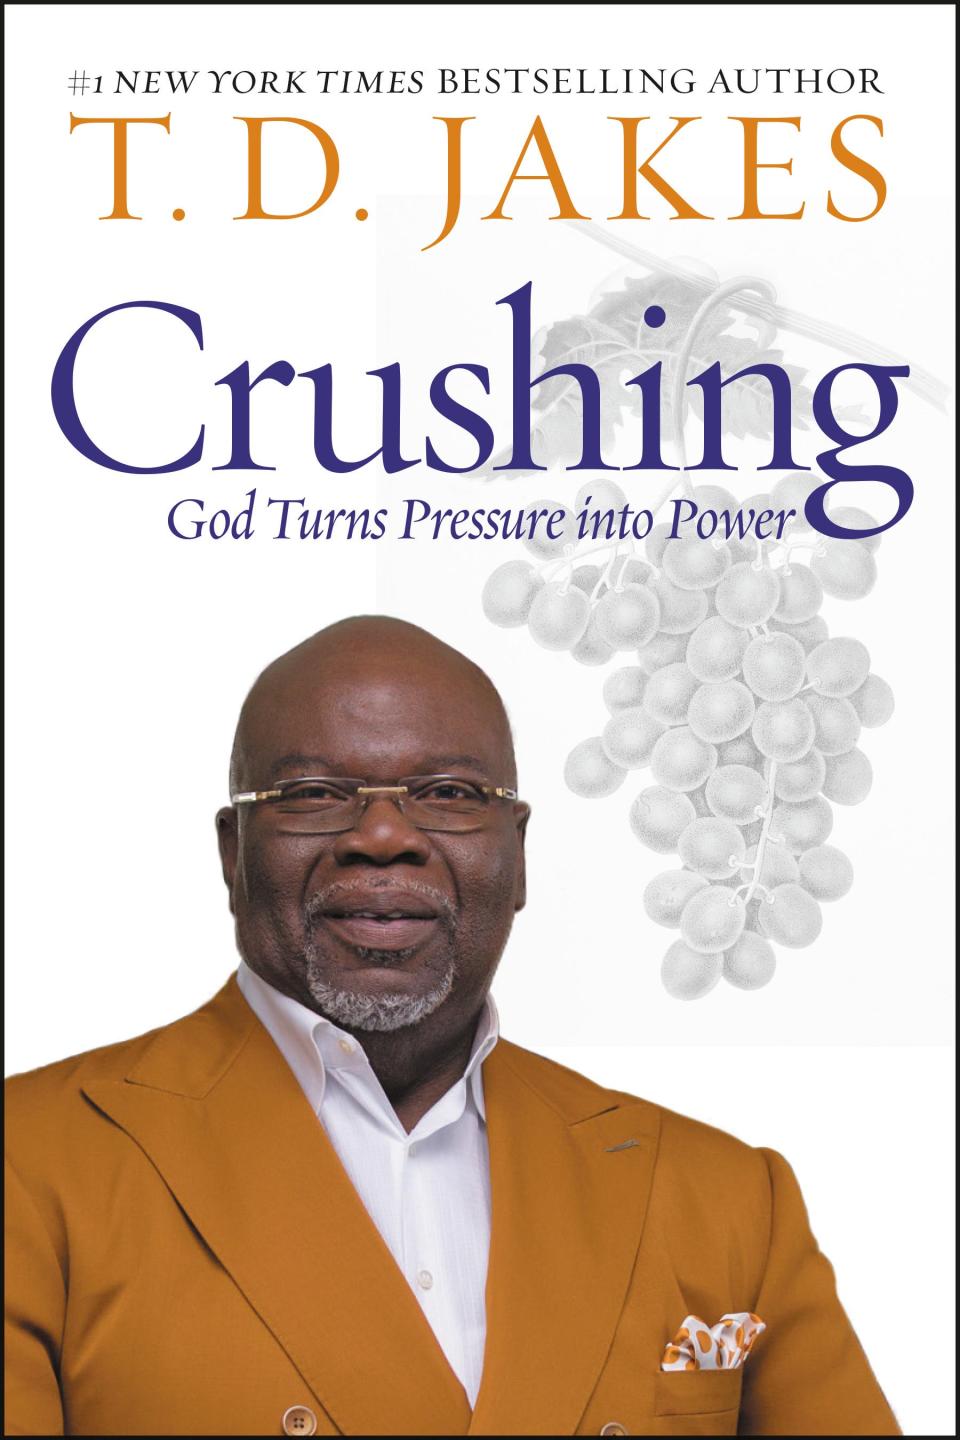 "Crushing" by T.D. Jakes